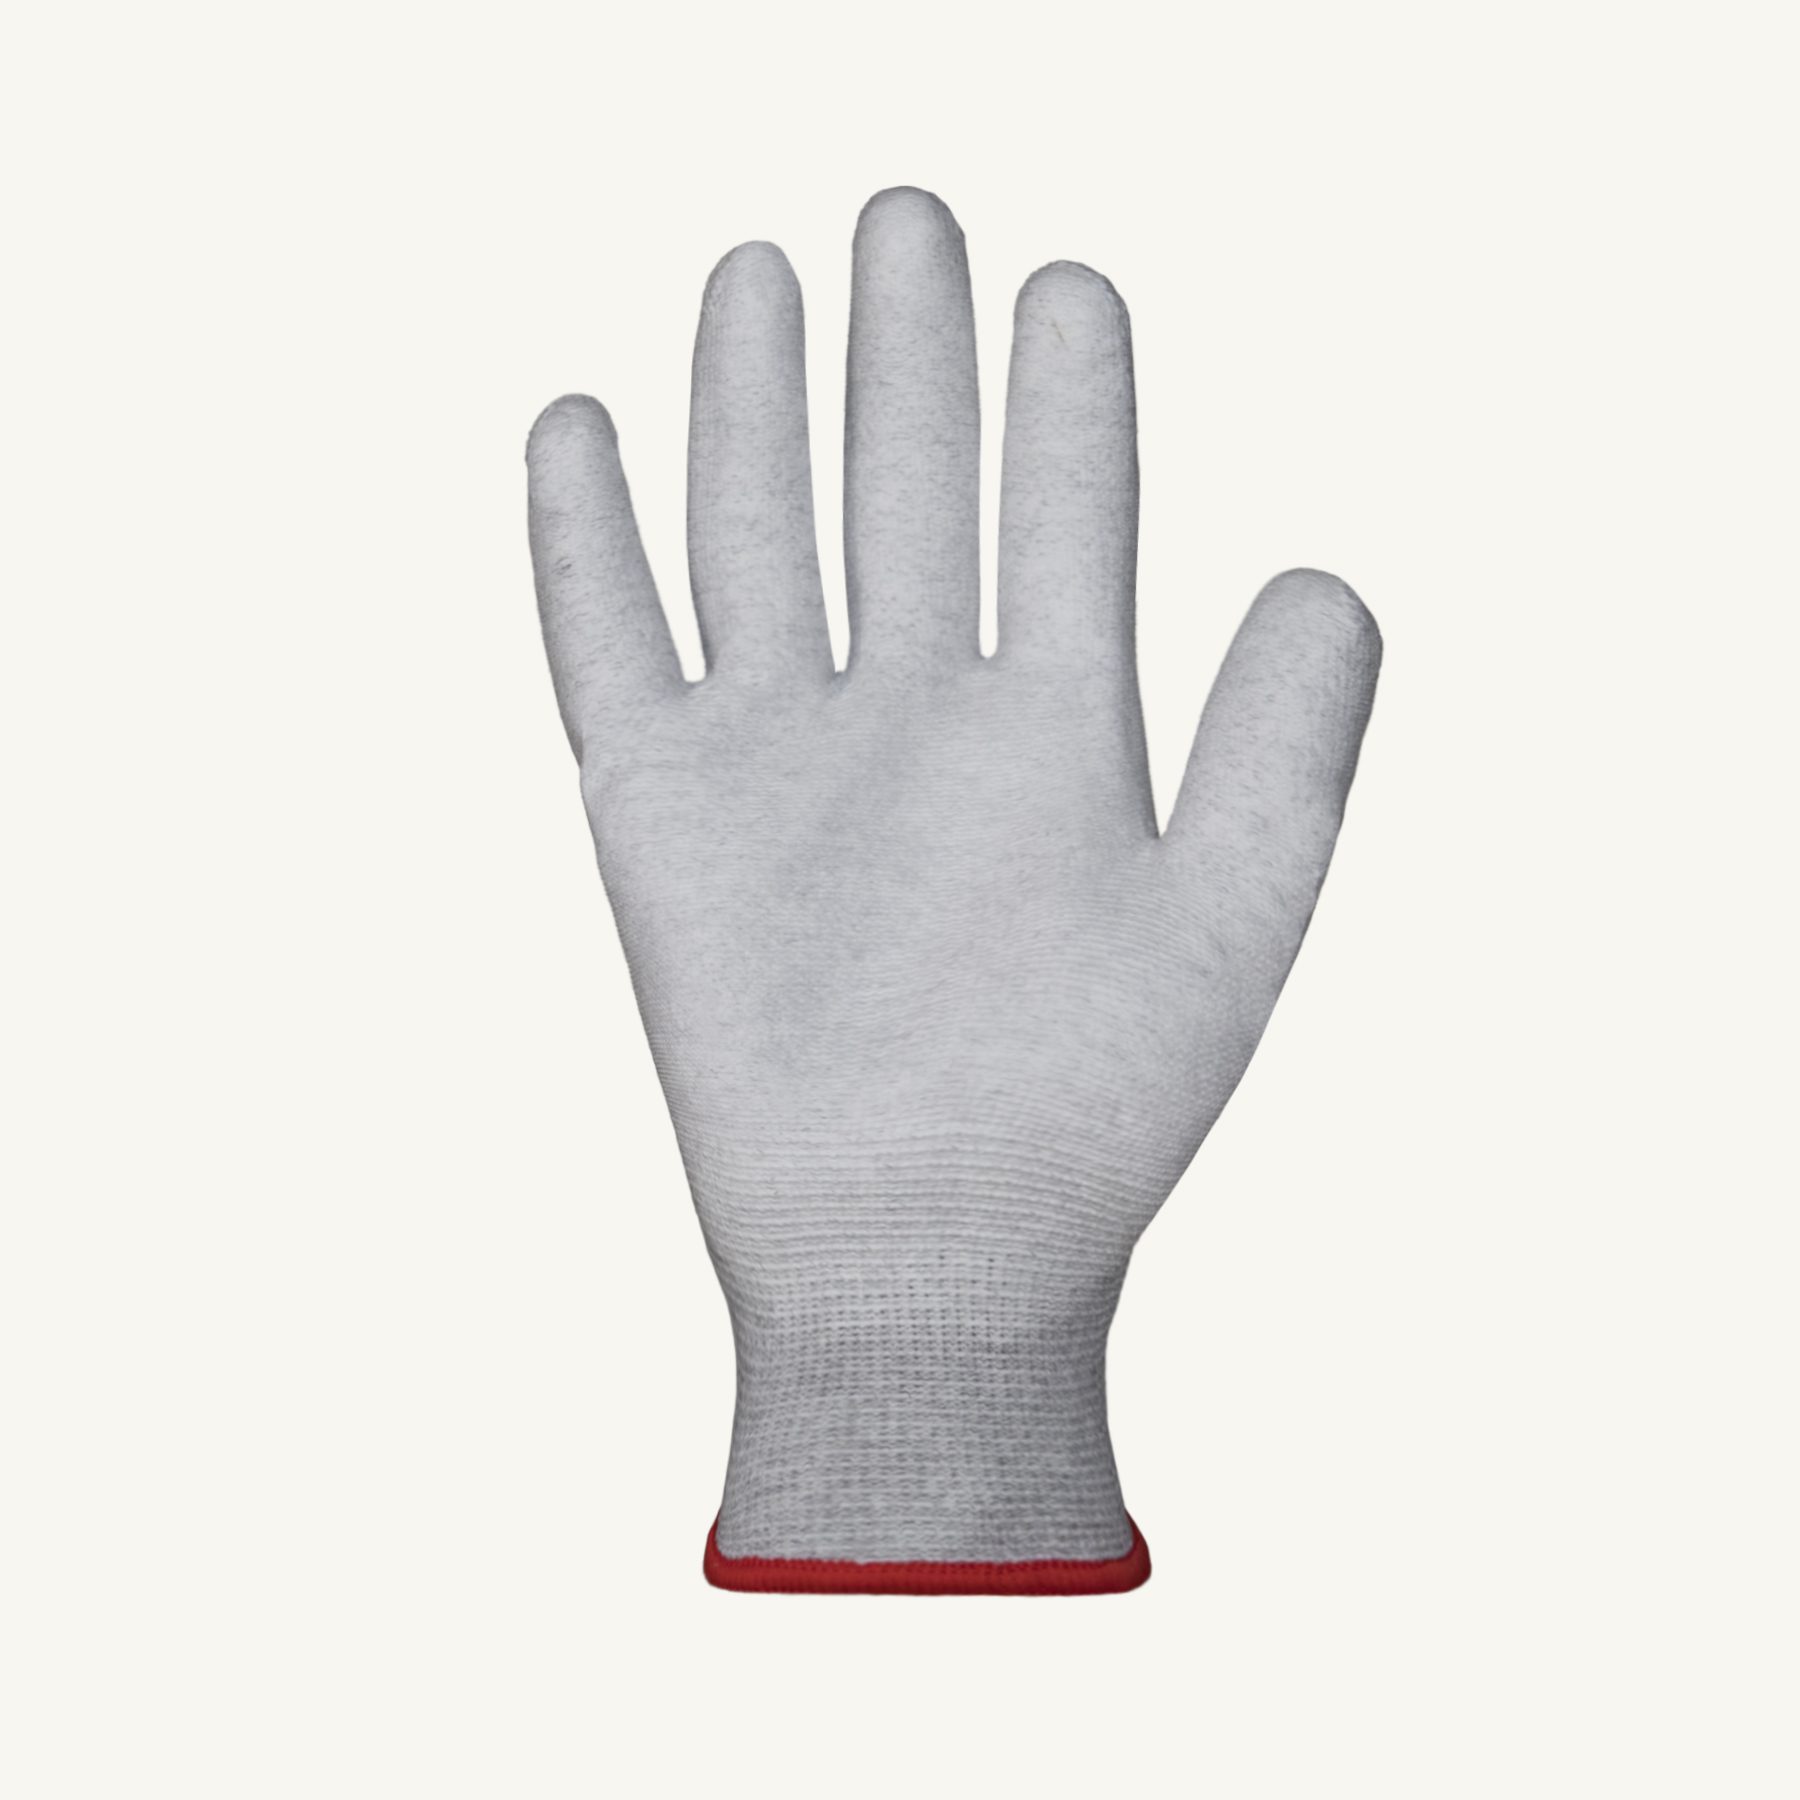 Extra-Long Cotton Glove Liners